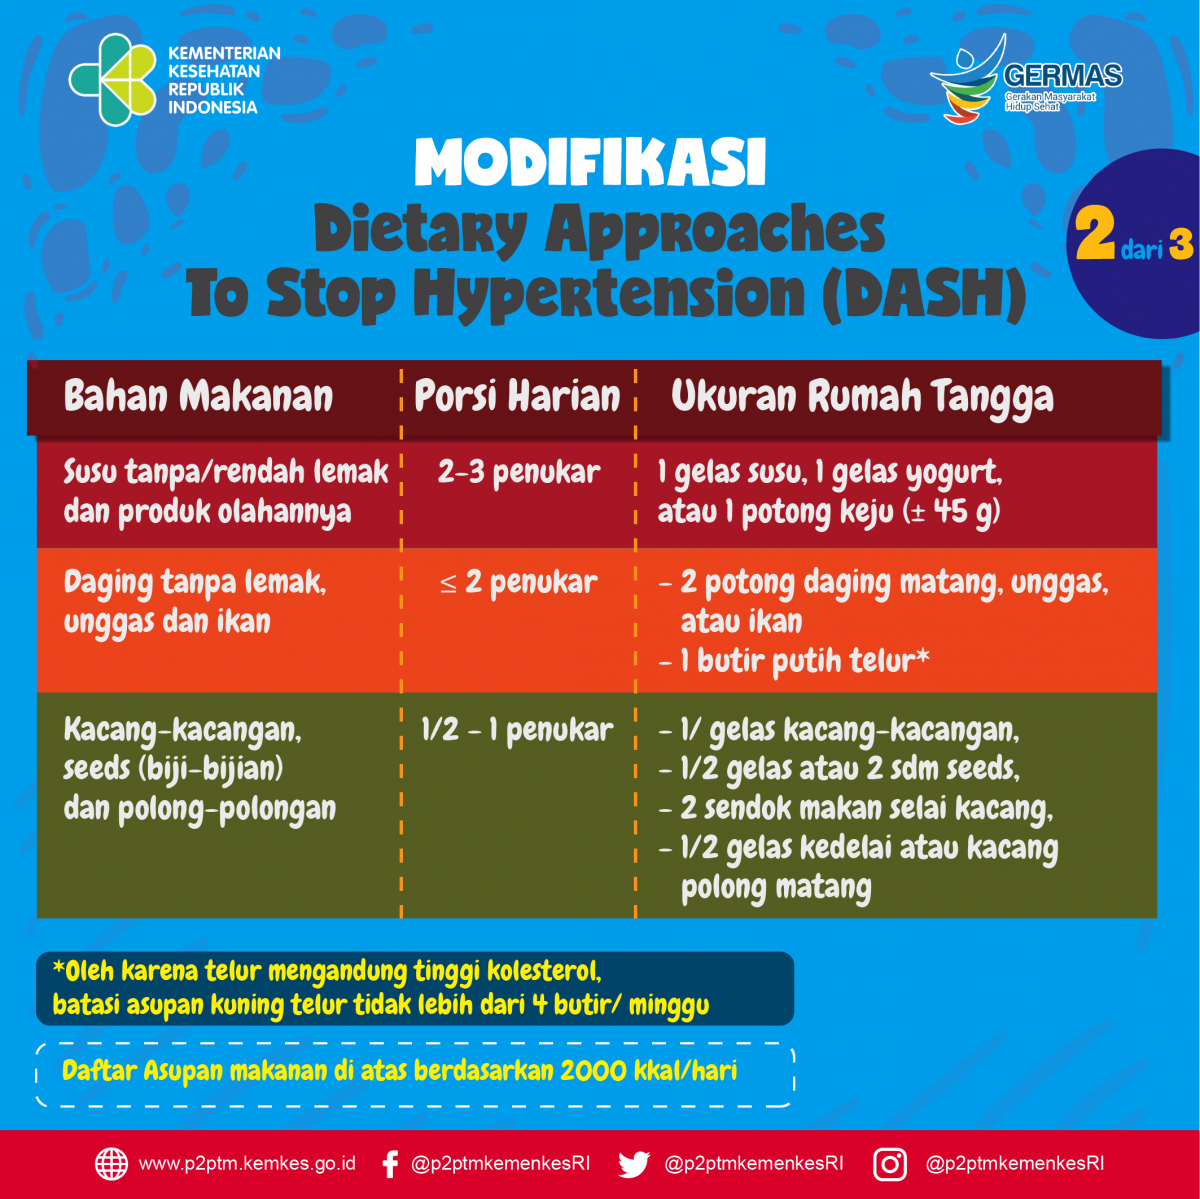 Tabel Modifikasi Dietary Approaches To Stop Hypertension (DASH) - bagian 2